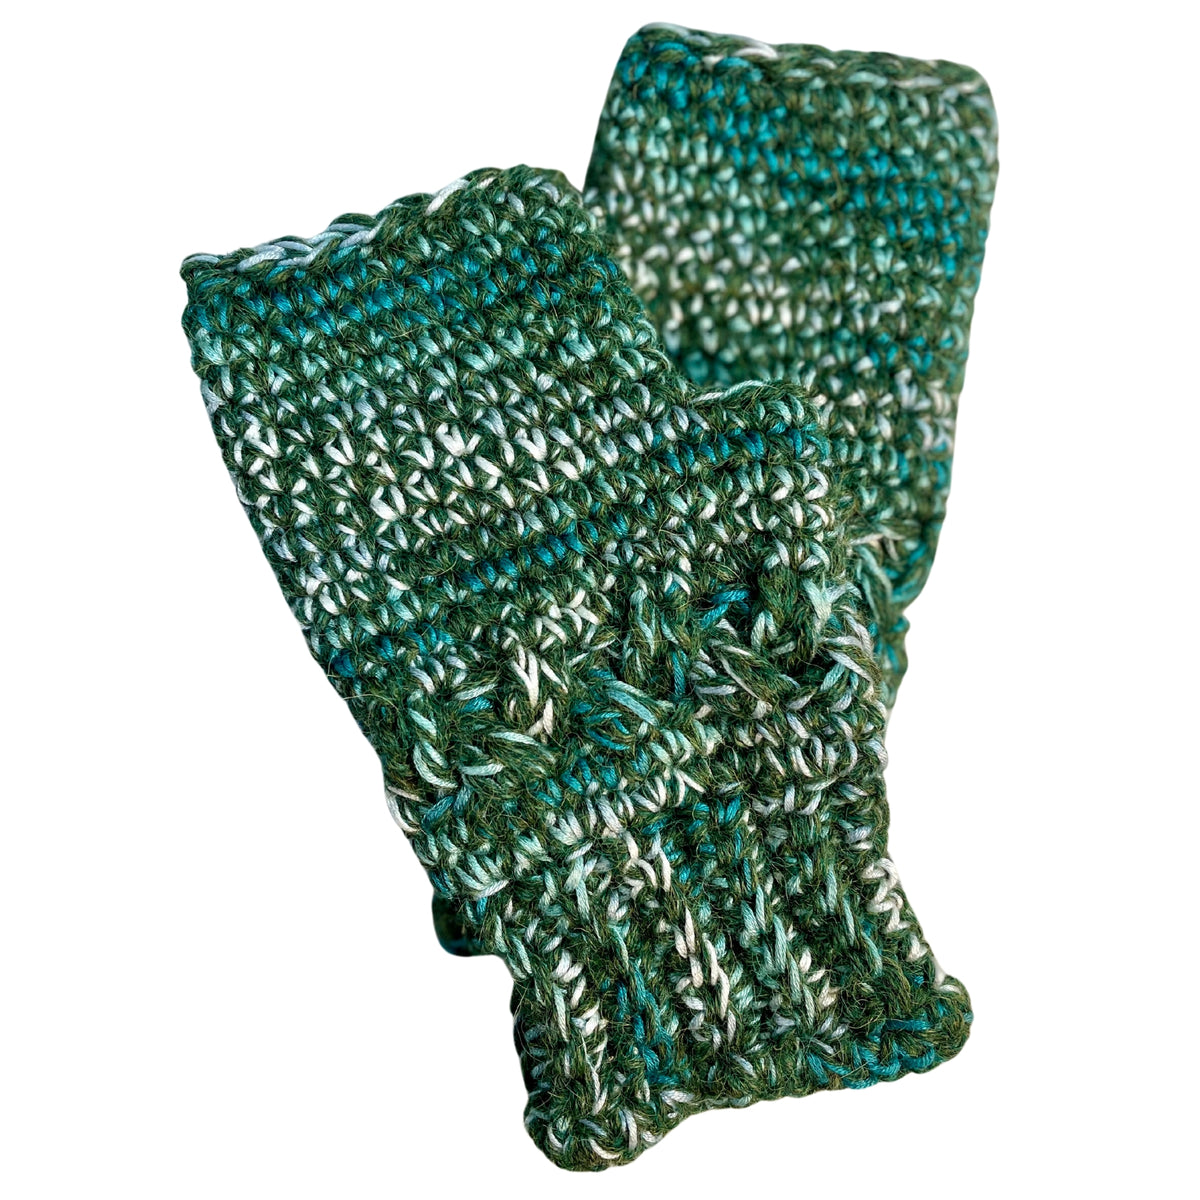 Alpacas of Montana moss green, teal, turquoise, seafoam, and white colored cozy soft warm handmade knitted crochet fingerless celtic wristie mittens made in Montana out of alpaca yarn and bamboo yarn.